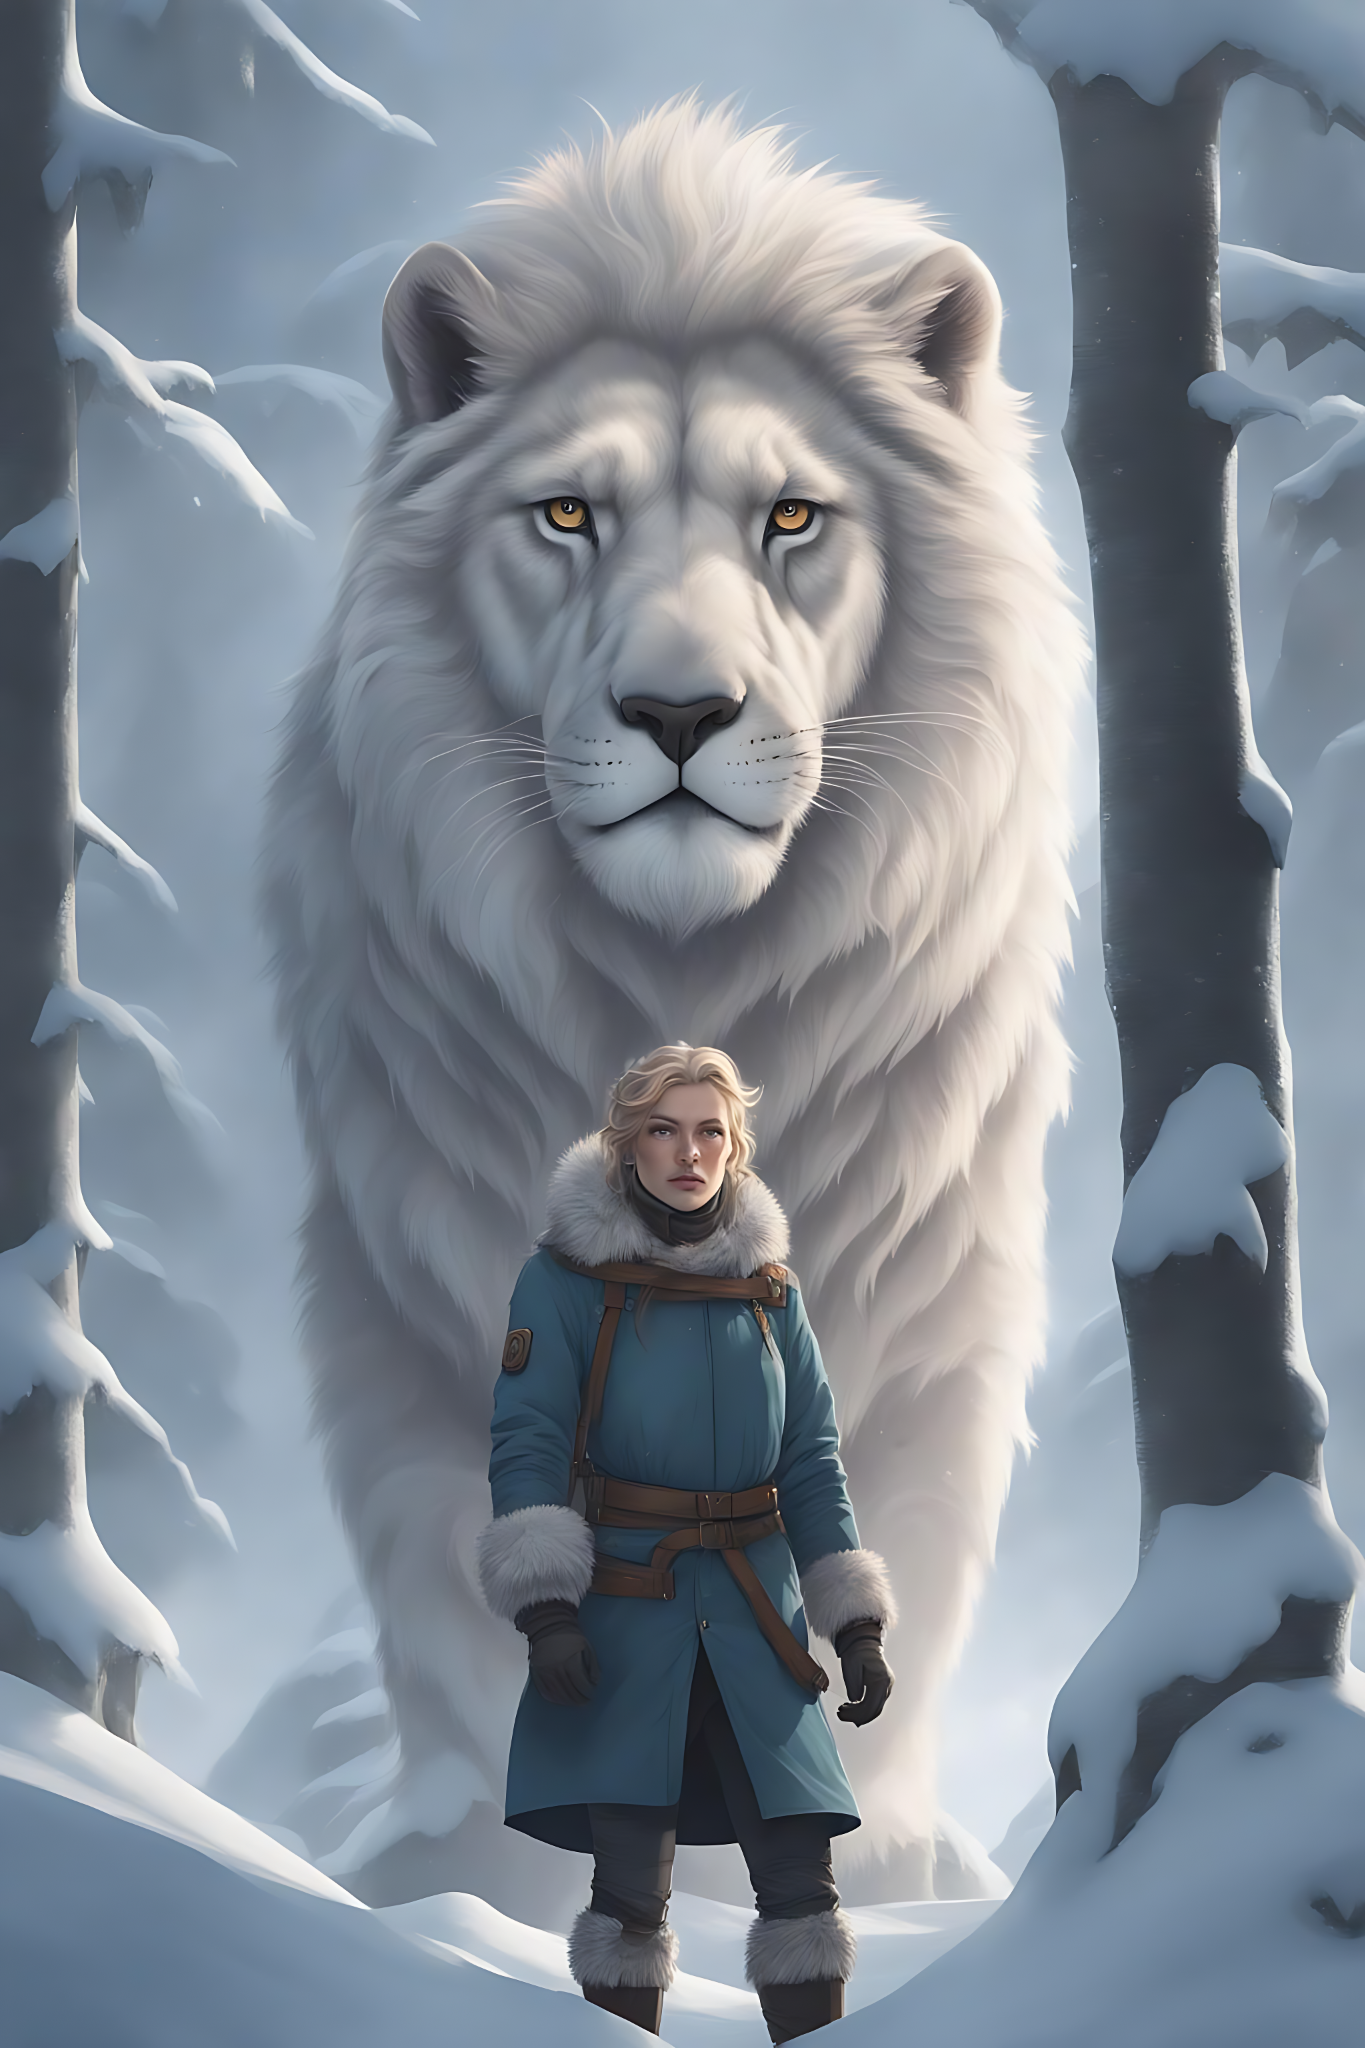 AI Snow Lion 2 - created by Henri Huotari with paint